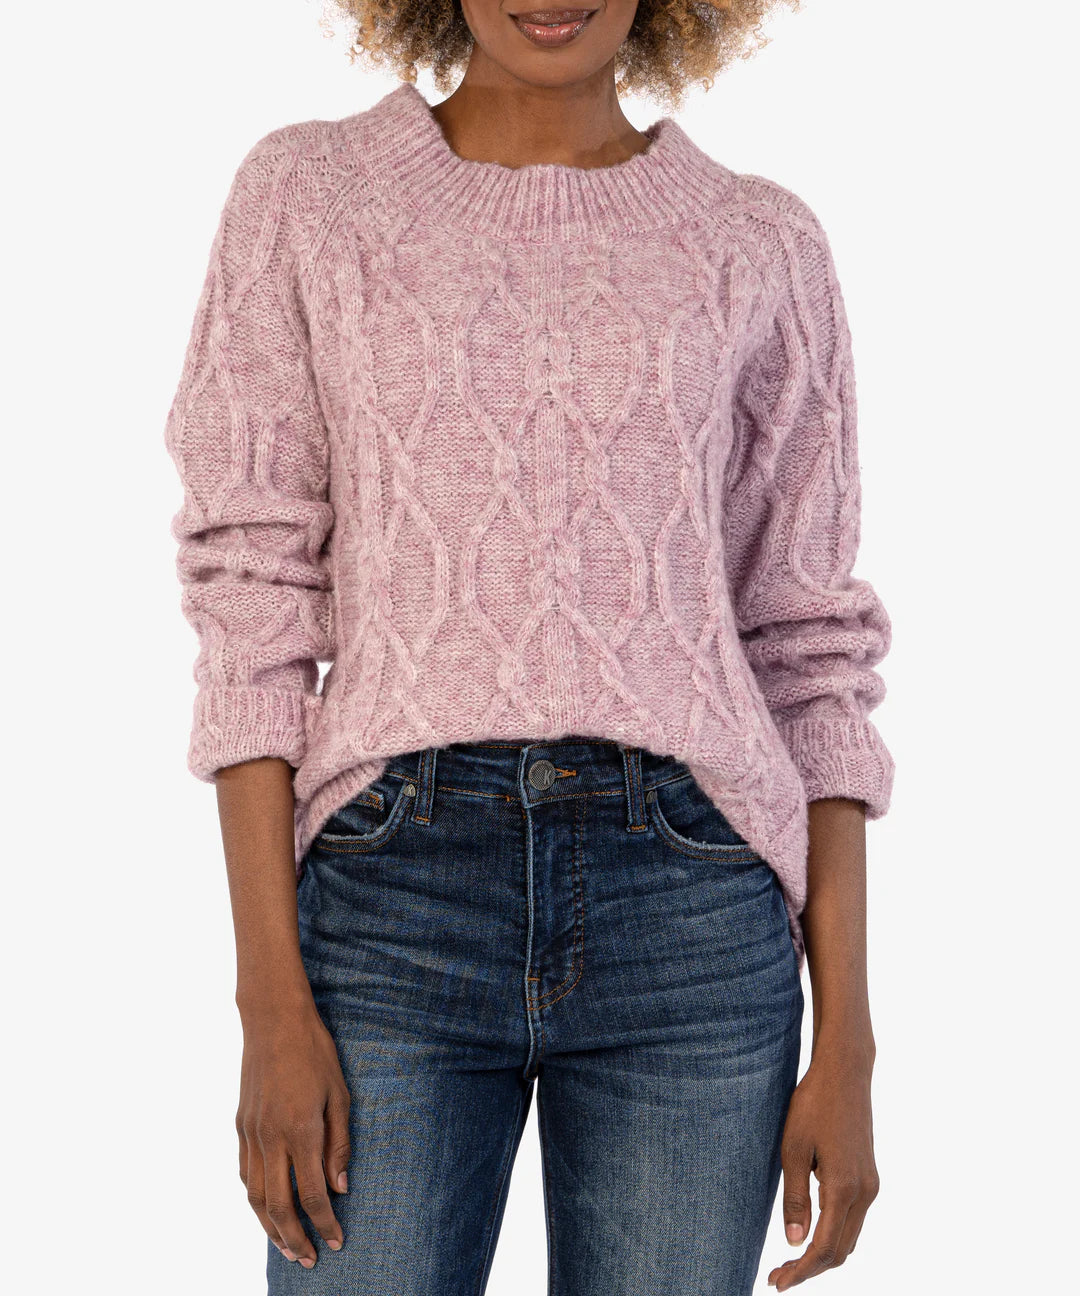 Kut from the Kloth Eudora Cable Knit Pullover Sweater in Lavender